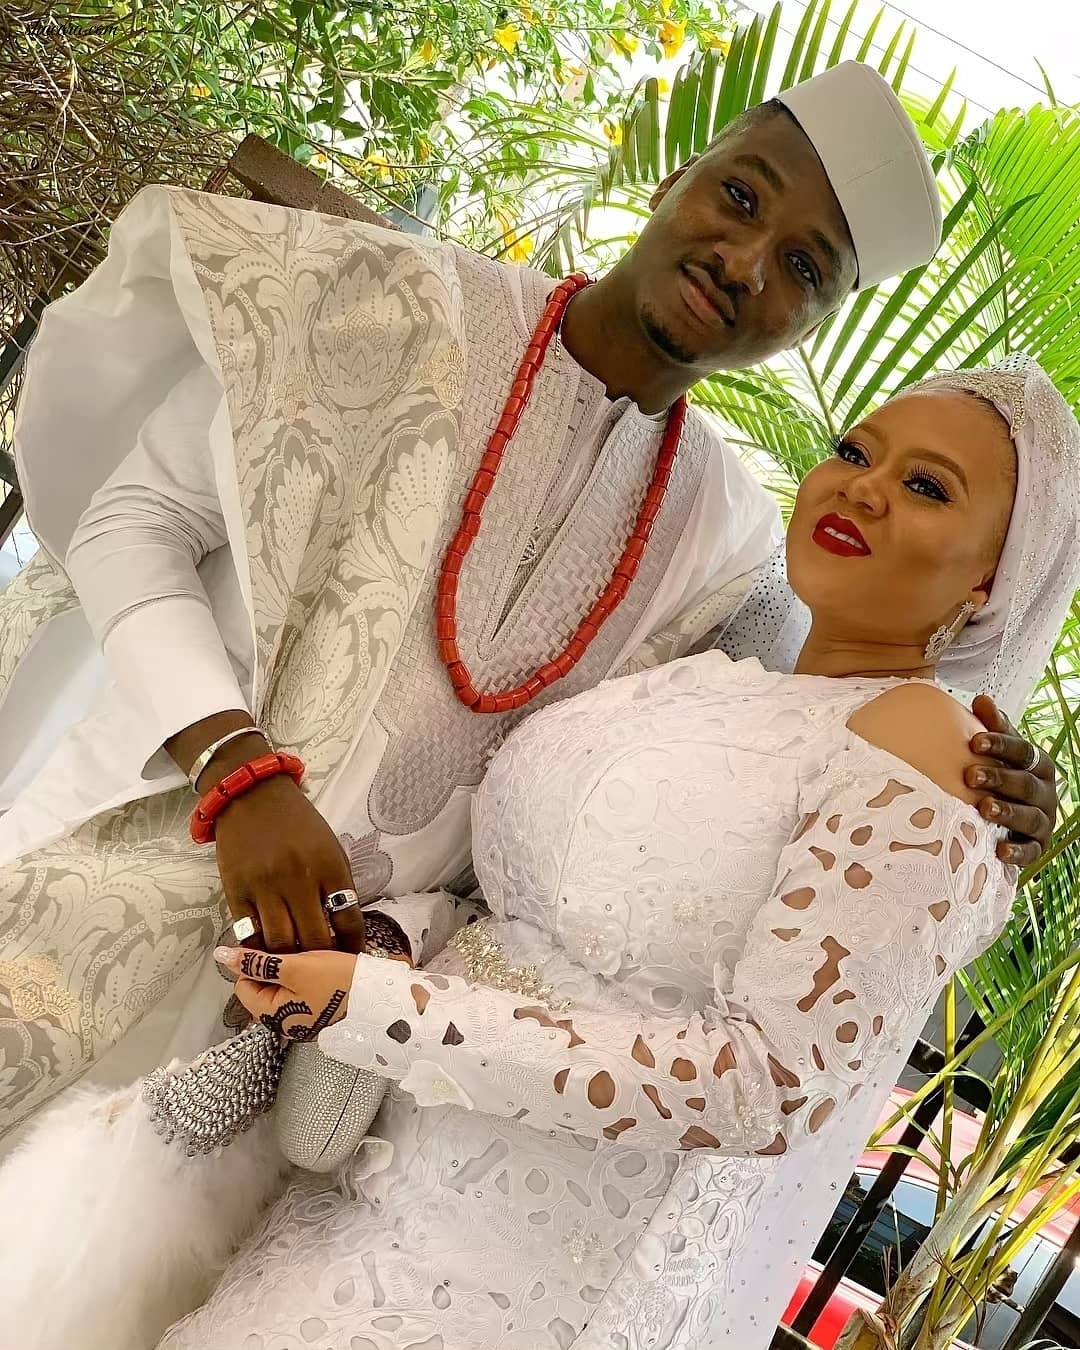 See All The Romantic Photos From Kraks Media CEO, Femi Bakre’s Traditional Wedding